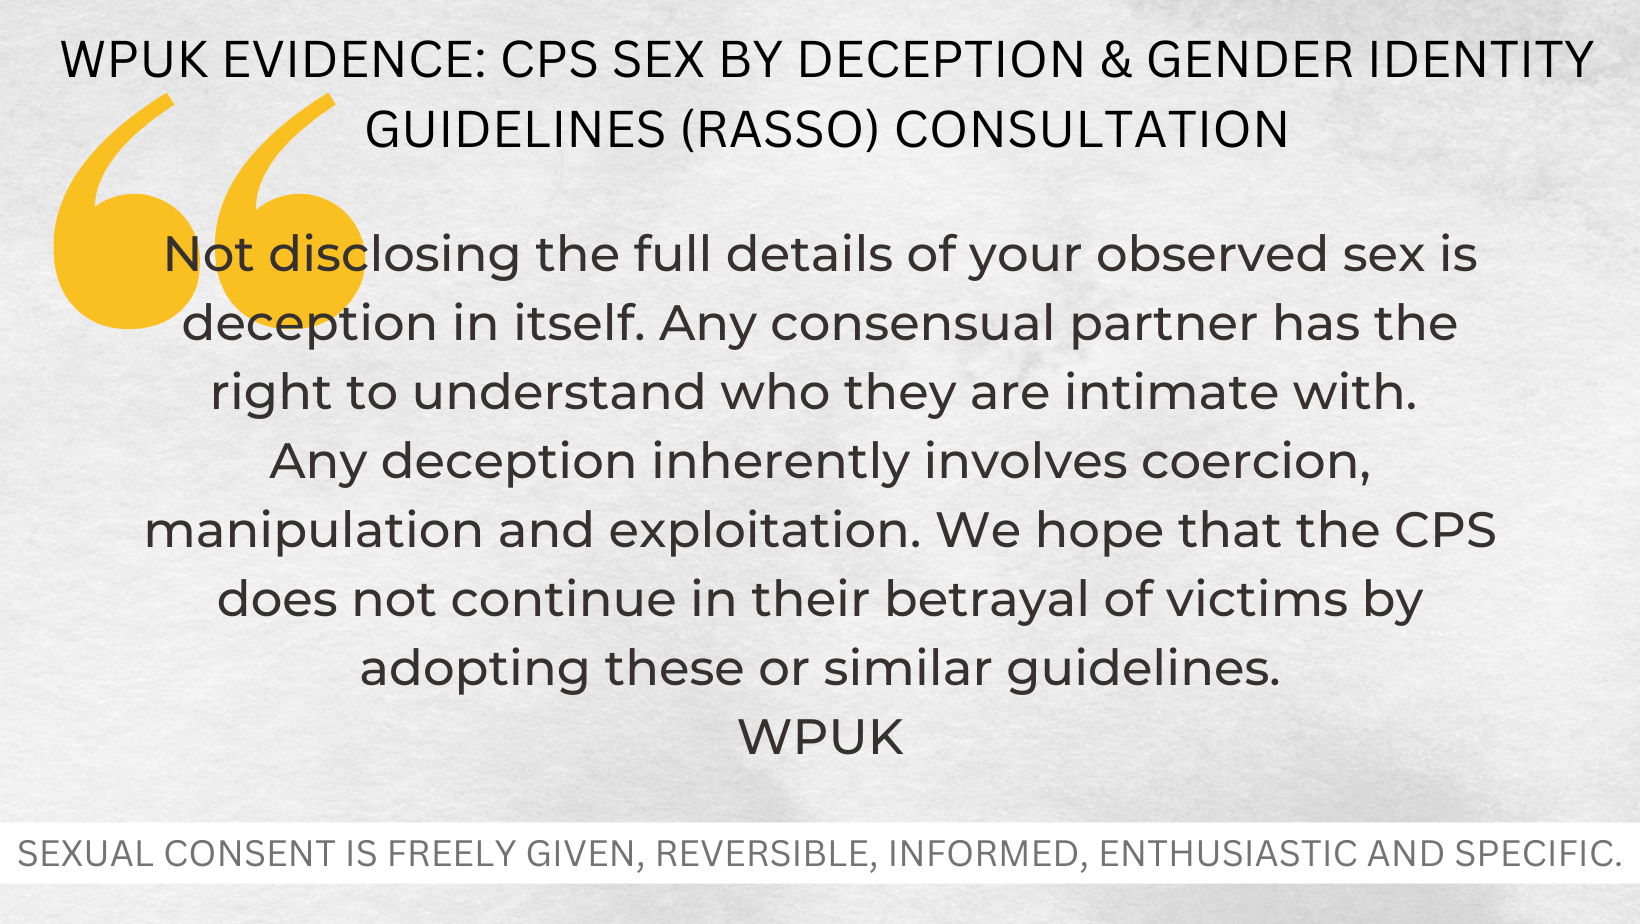 WPUK evidence to the CPS